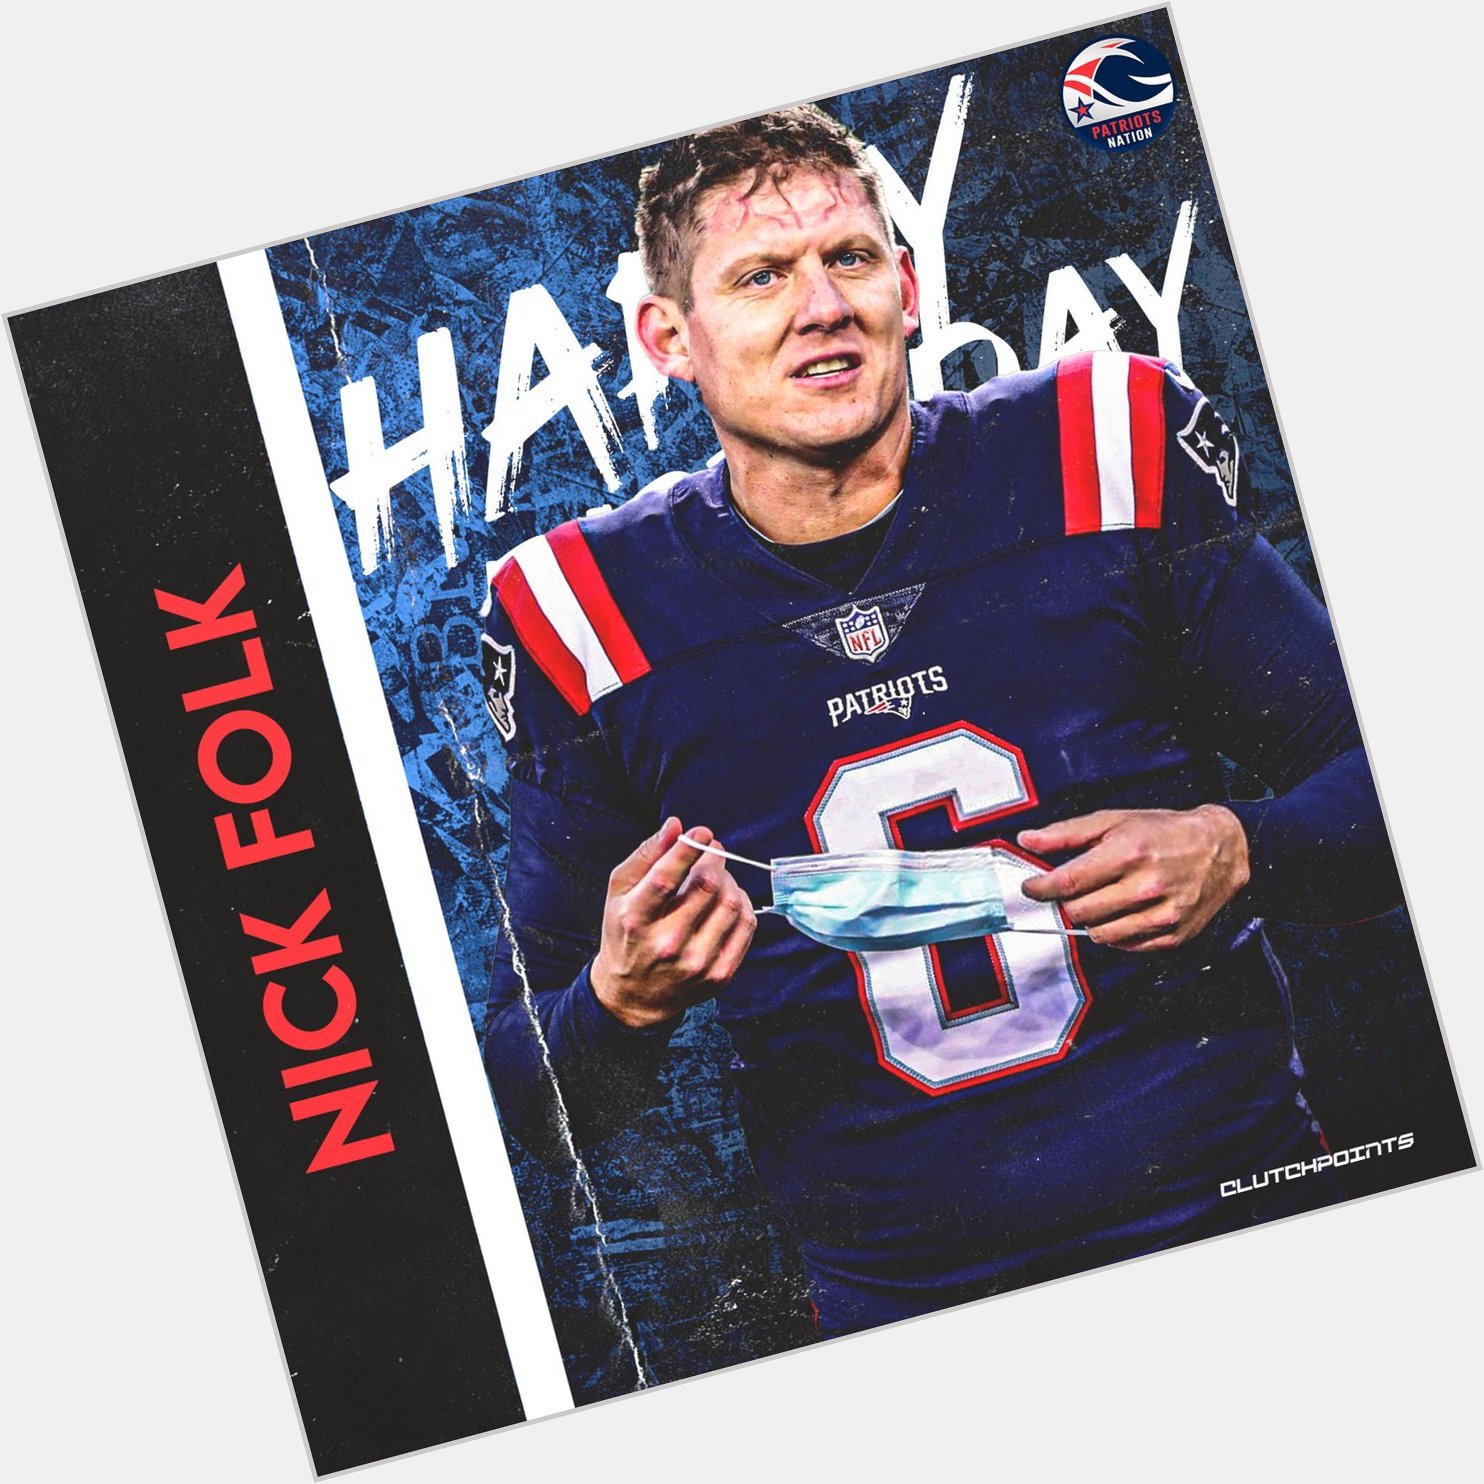 Join Patriots Nation in greeting Nick Folk a happy 37th birthday!  